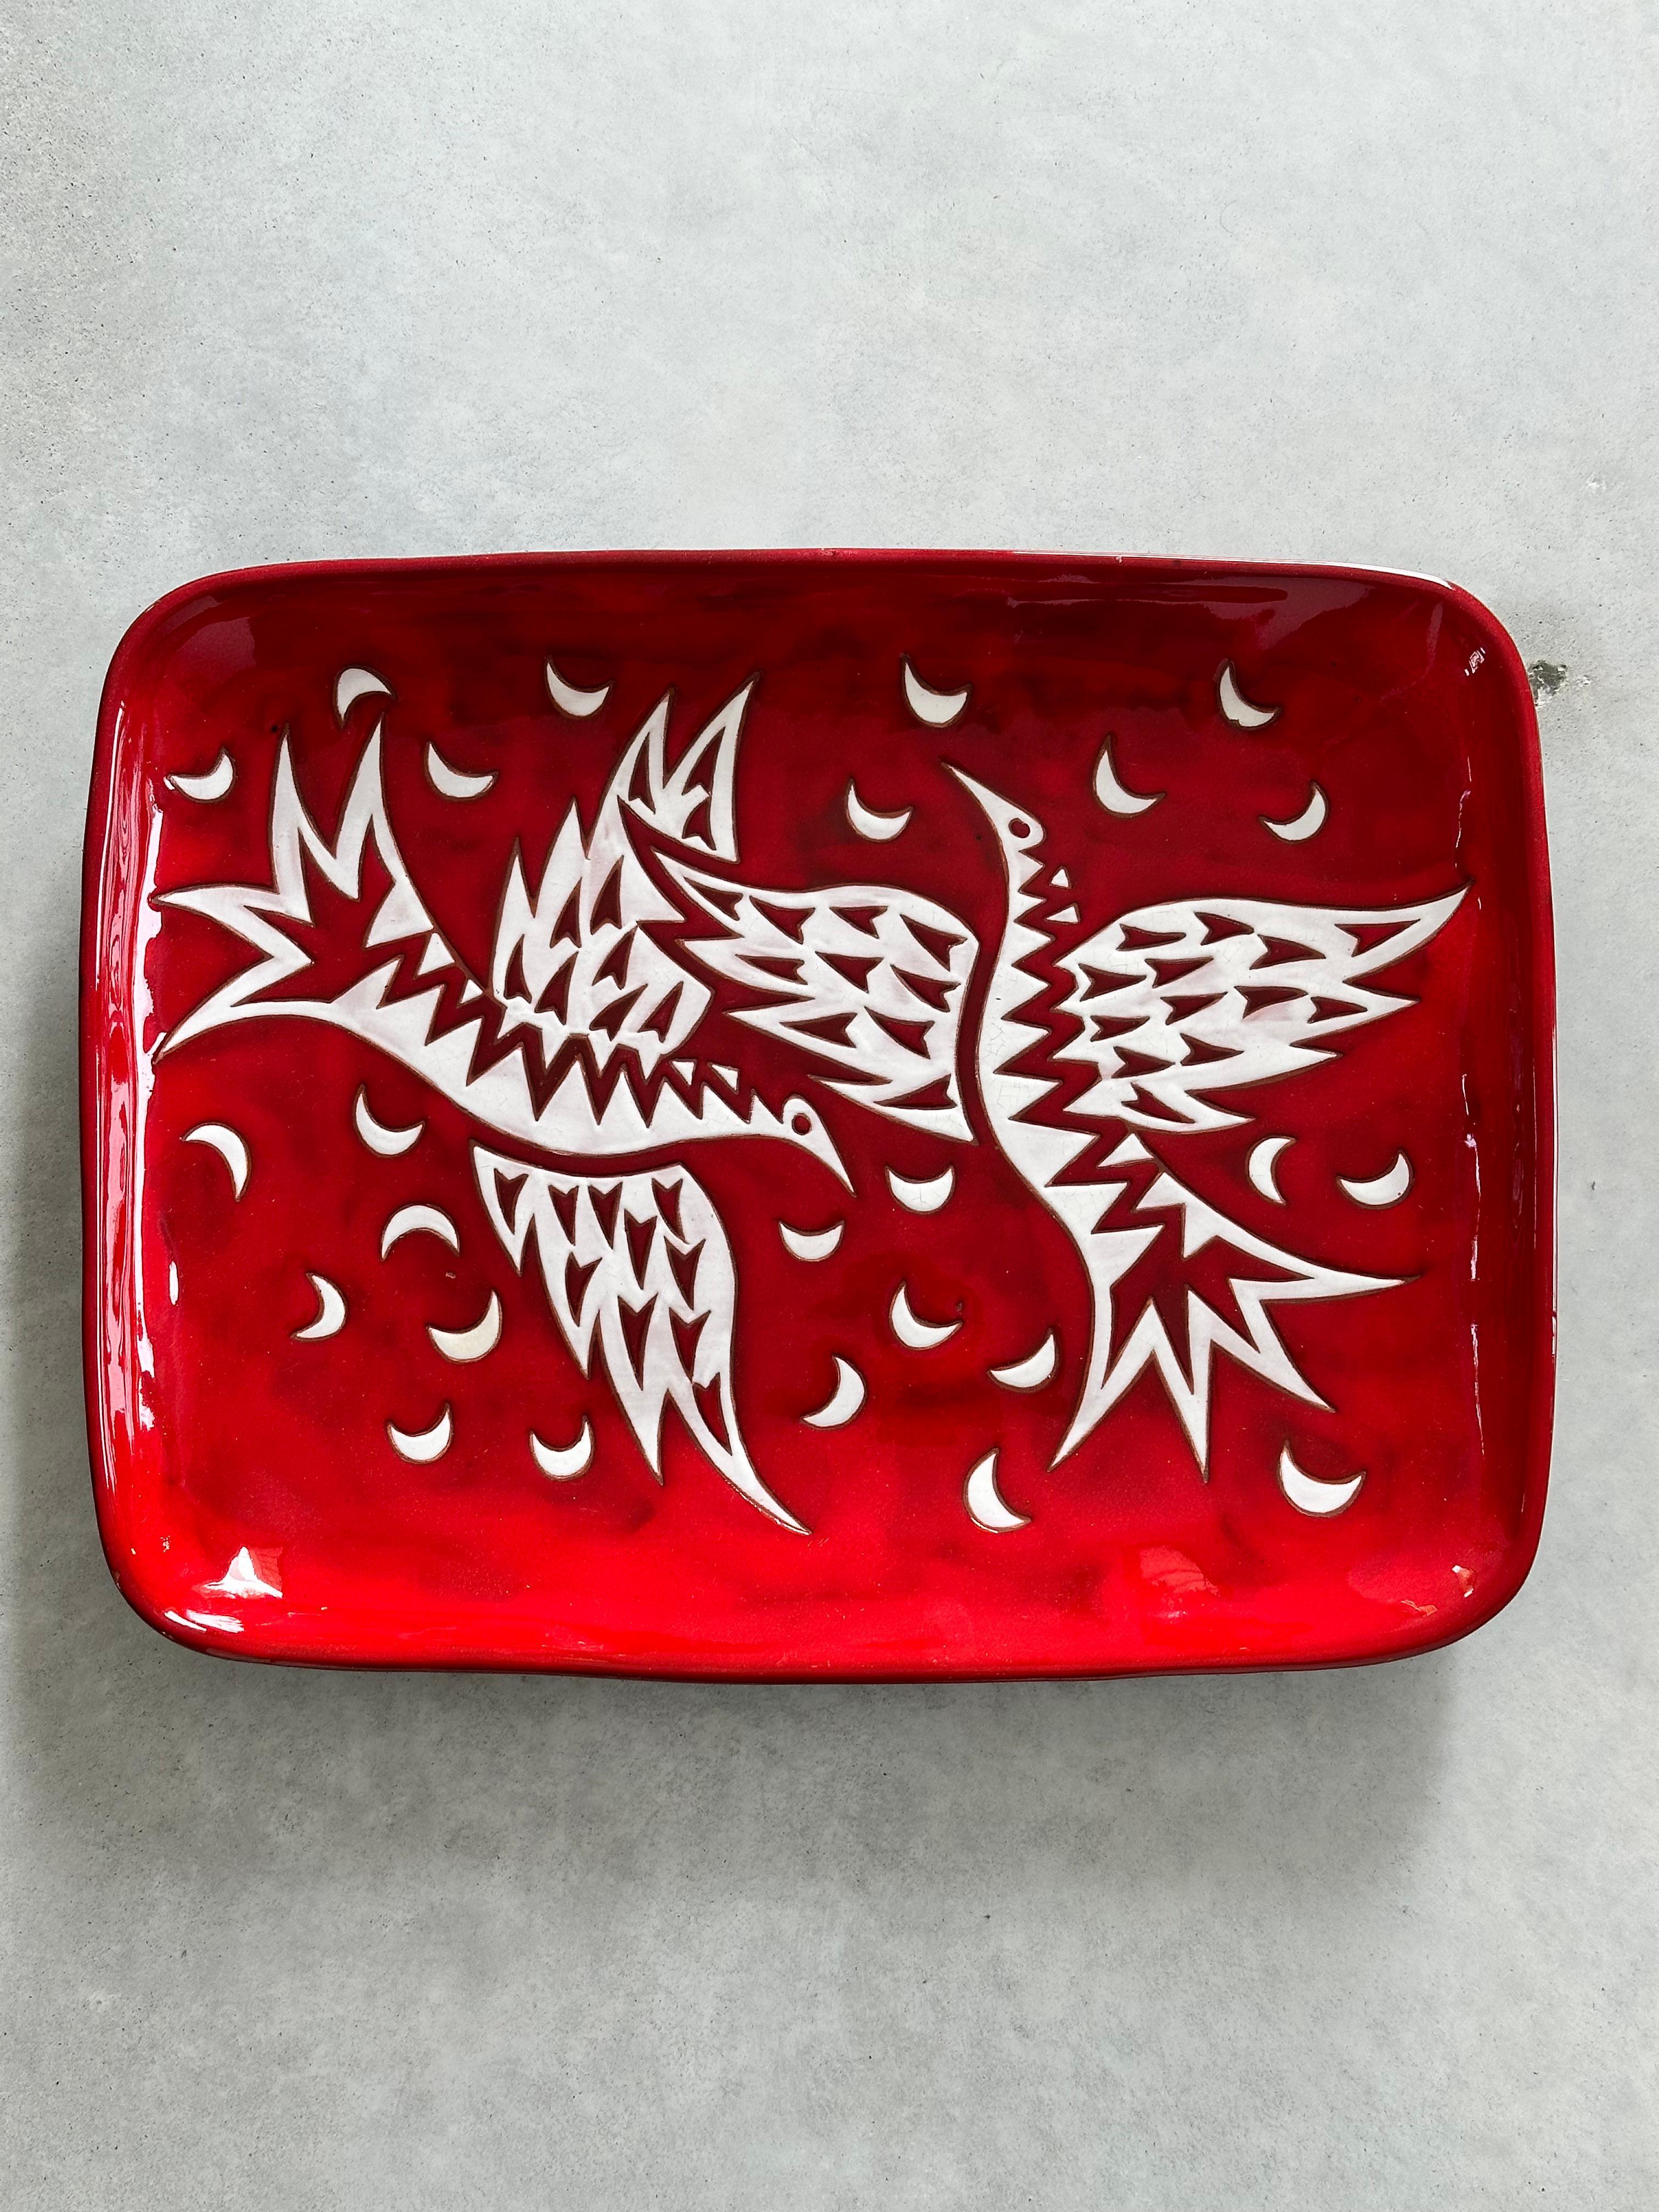 Huge ceramic dish from the Sant-Vicens pottery workshops in Perpignan (south of France).

Drawing made by Jean Picart Le Doux.

Two white stylized bird on an intense red background.

Limited series of 50 copies, this one is numbered 24/50.

Dish in